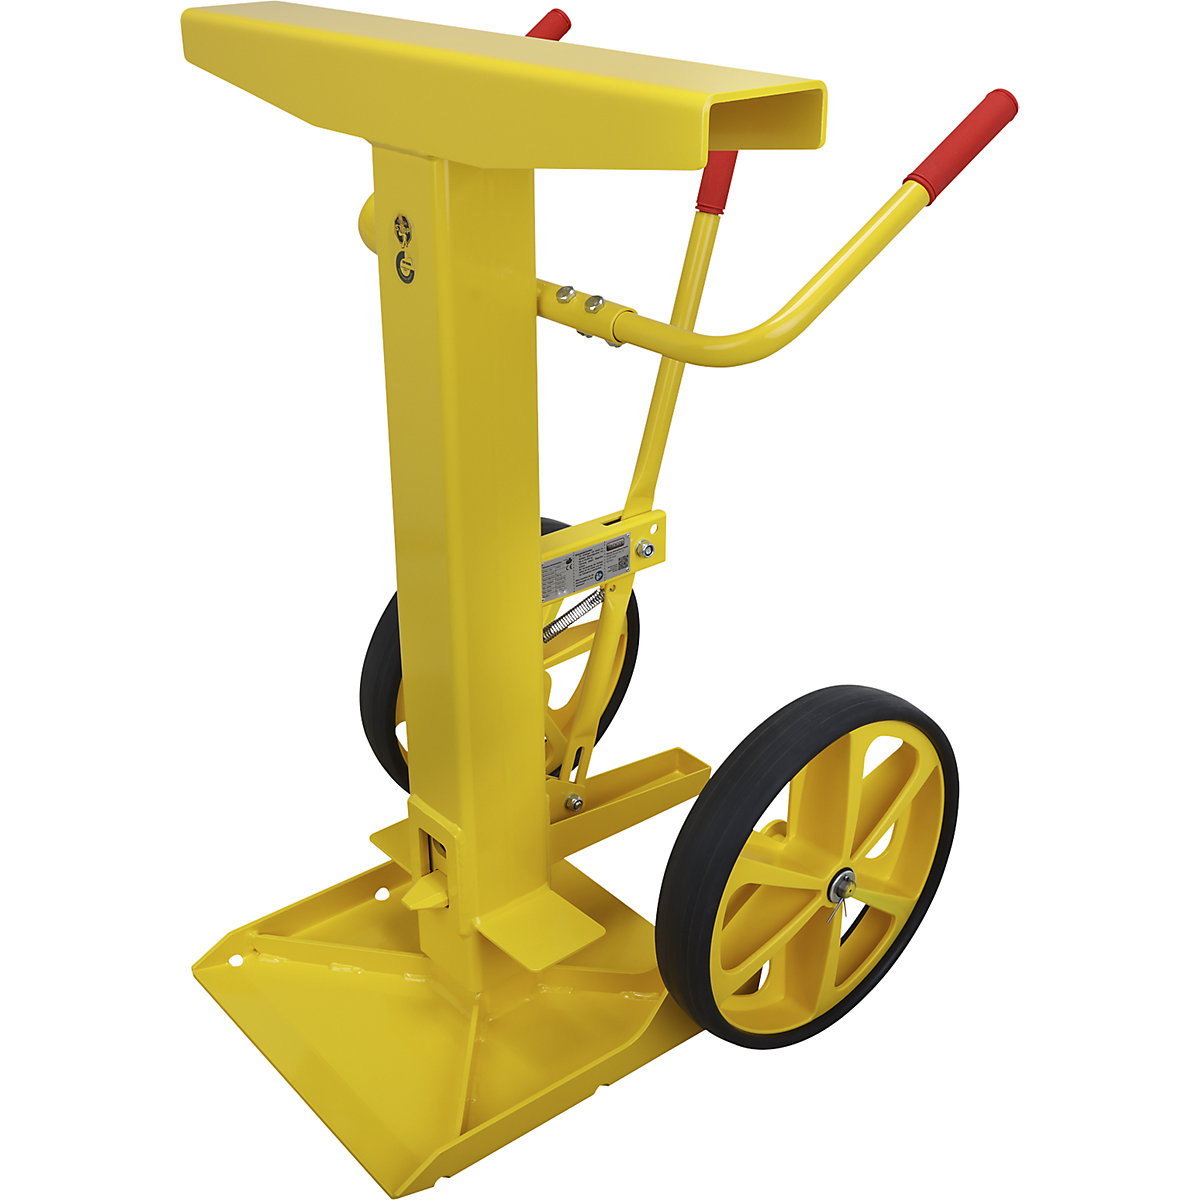 Loading support, trailer stand